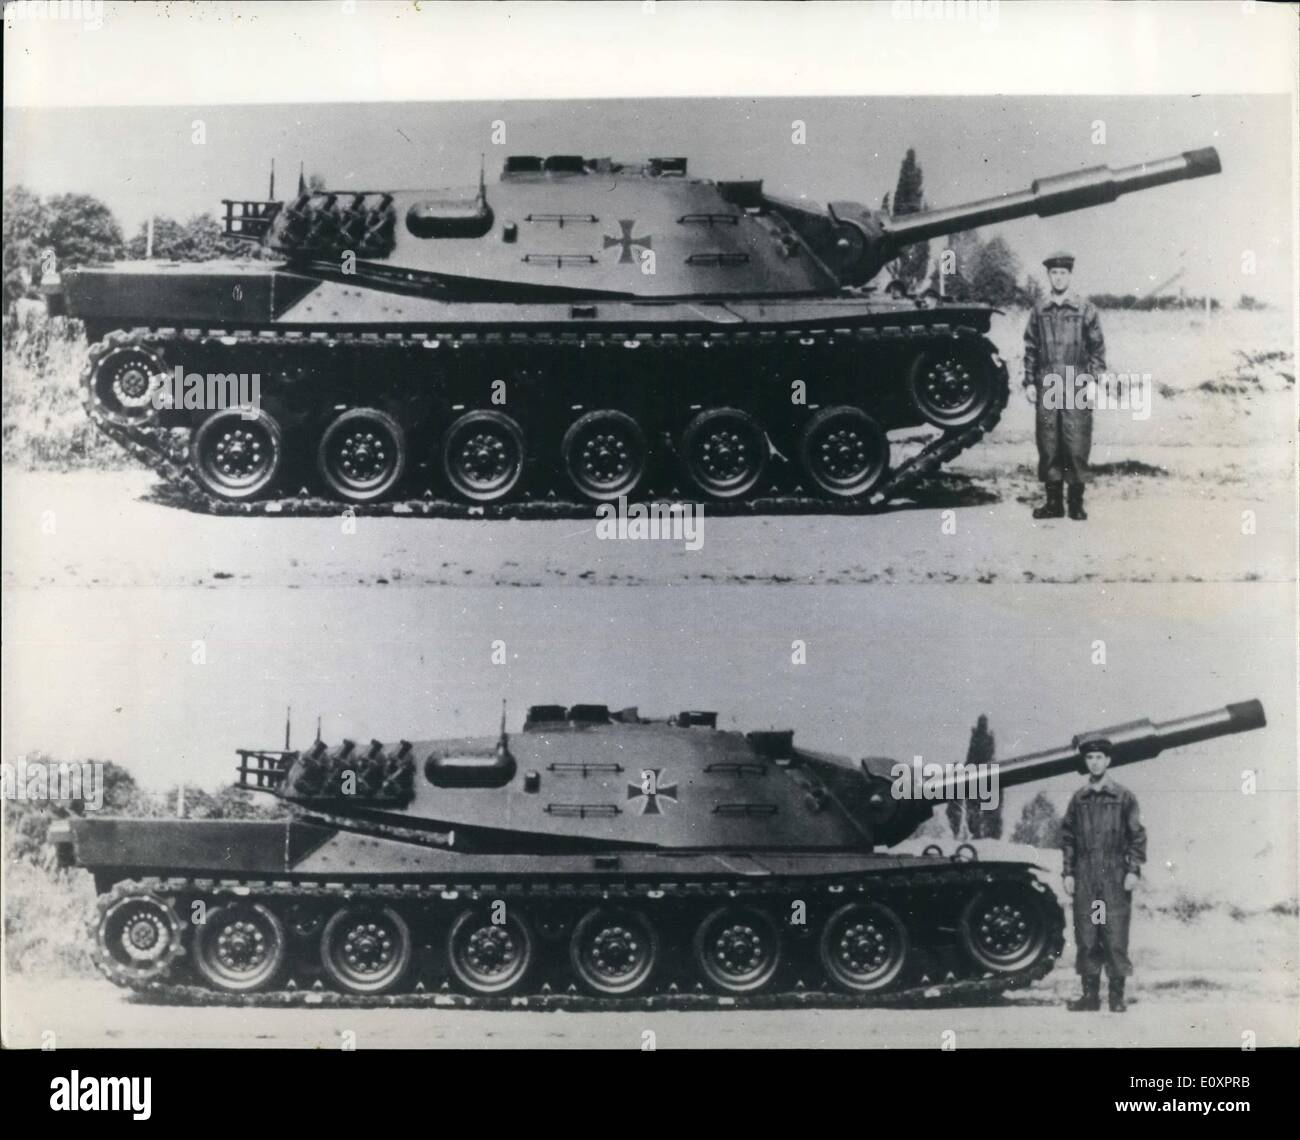 Oct. 10, 1967 - New U.S. German Battle Tank; This is the new 50 ton MBT 70 battle tank, a joint United States West Germany development, seen during a demonstration in Augsberg. The giant tank has variable suspension the chassis can be adjusted through a height of about 18 ins. from its high speed position (top picture) to its attitude in battle and ever rough terrain. Each tank is estimated to cost between 198,000 and  216,000, if a series production of 1,500 becomes possible, but the Hundestag has yet to decide on its introduction for the German armed forces Stock Photo